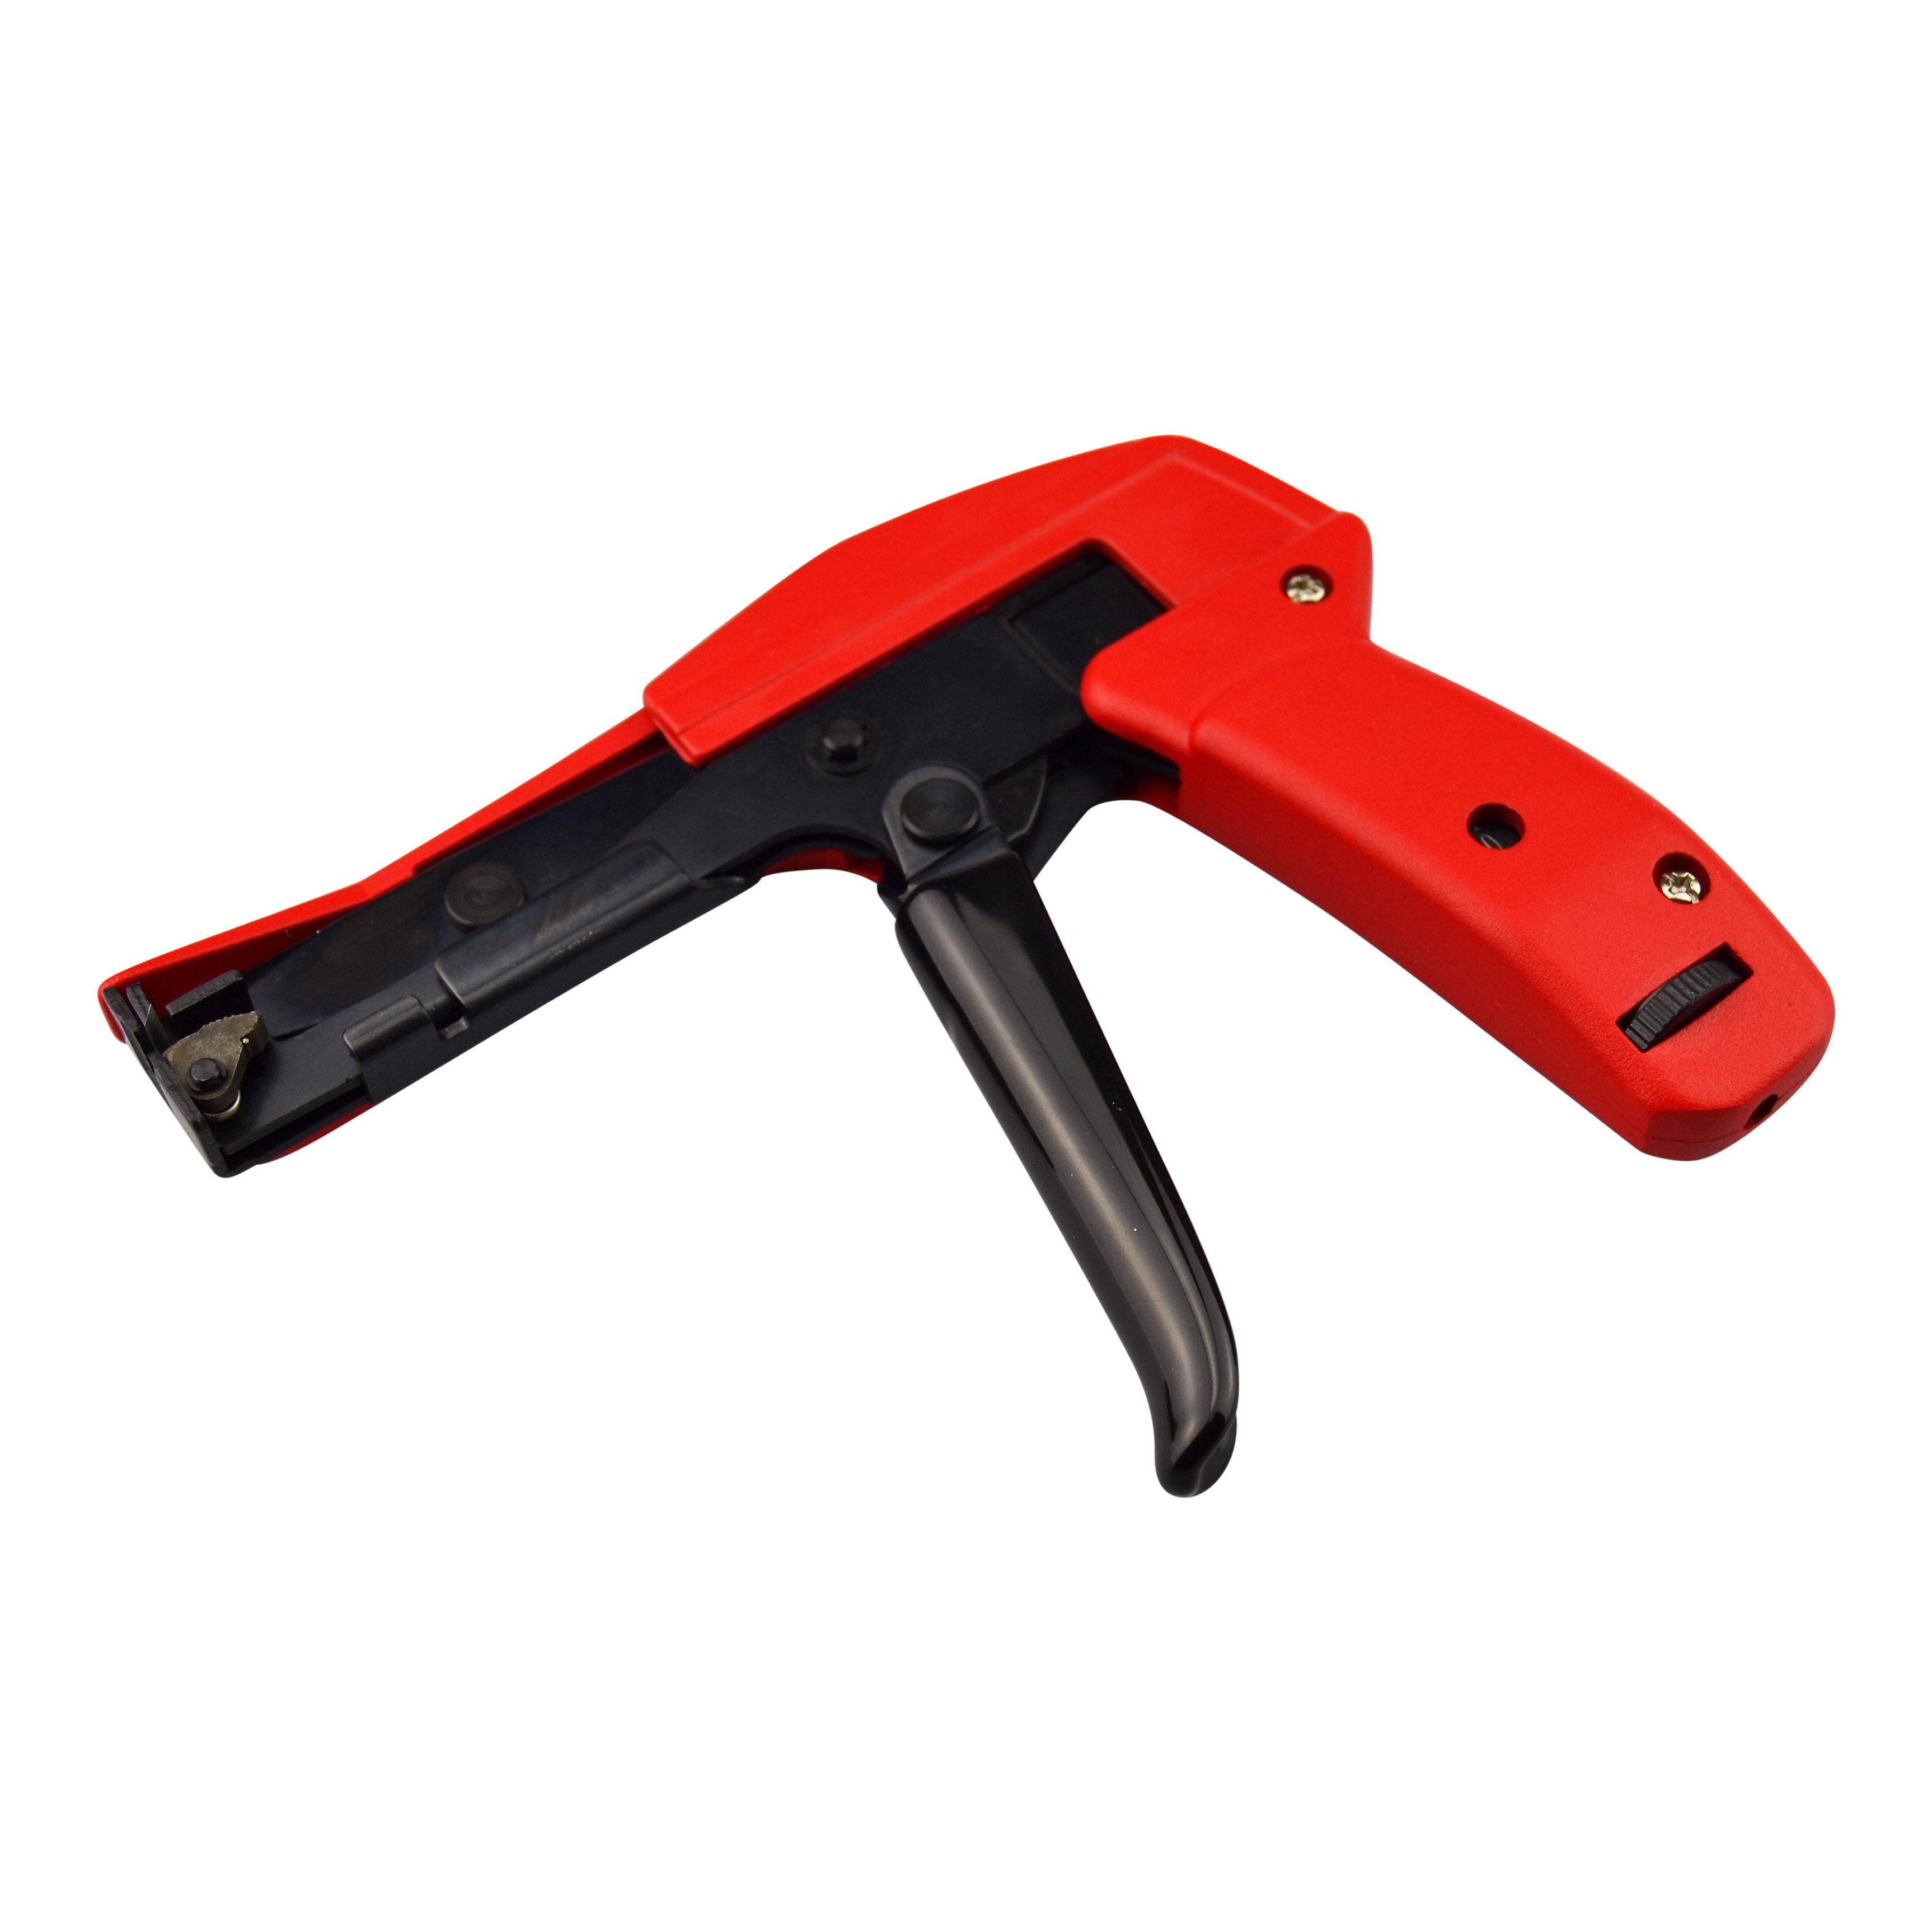 Automatic Cable Tie Installation Tool to Suit Nylon Cable Ties up to 4.8mm Width